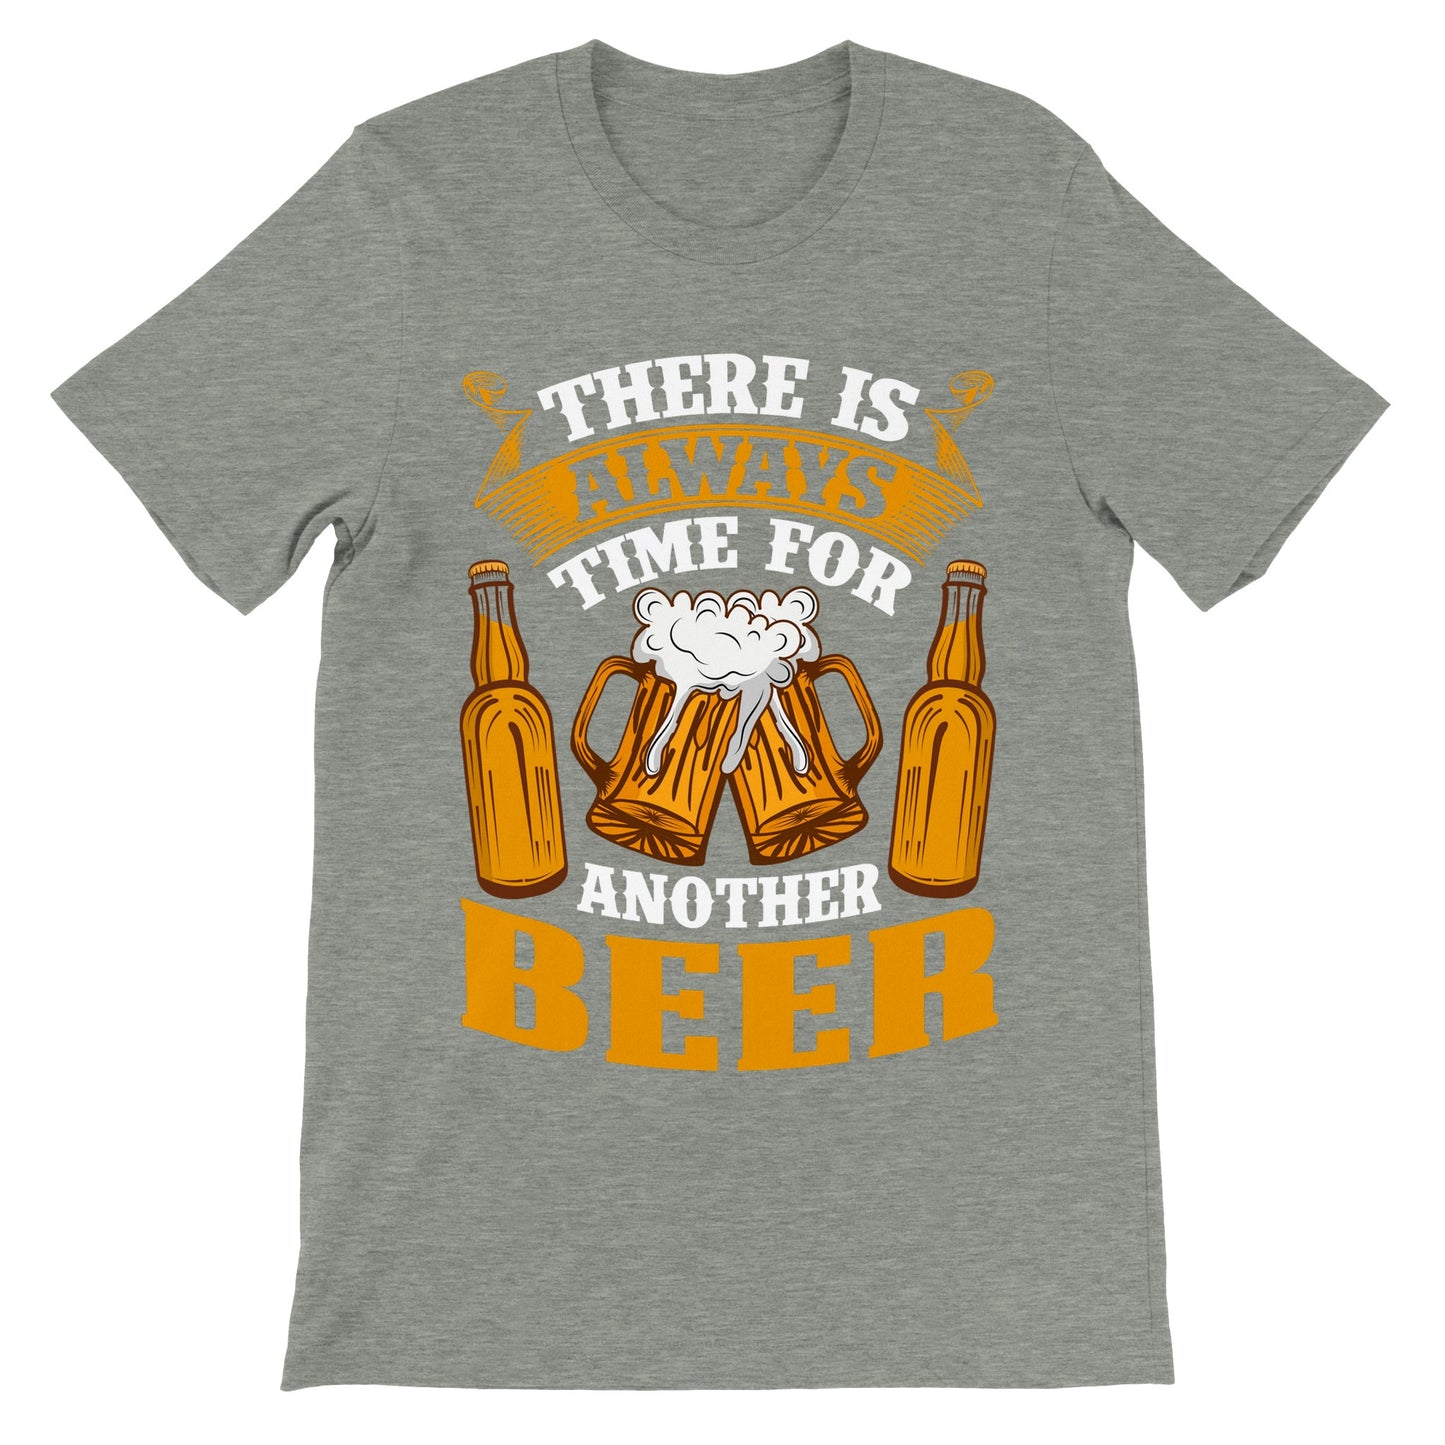 Funny T-Shirts - There Is Always Time For Another Beer - Premium Unisex T-Shirt 